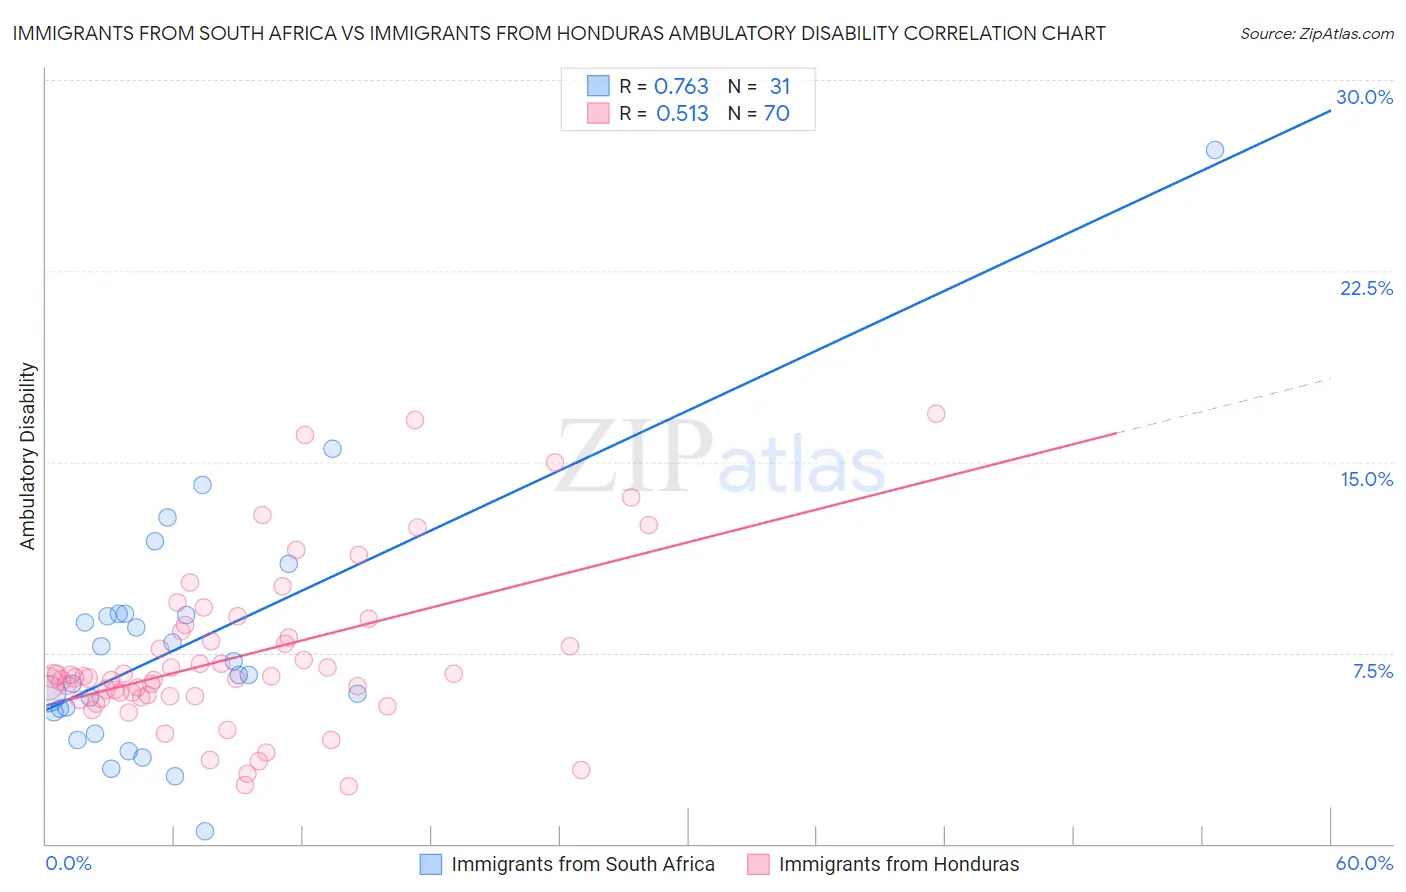 Immigrants from South Africa vs Immigrants from Honduras Ambulatory Disability